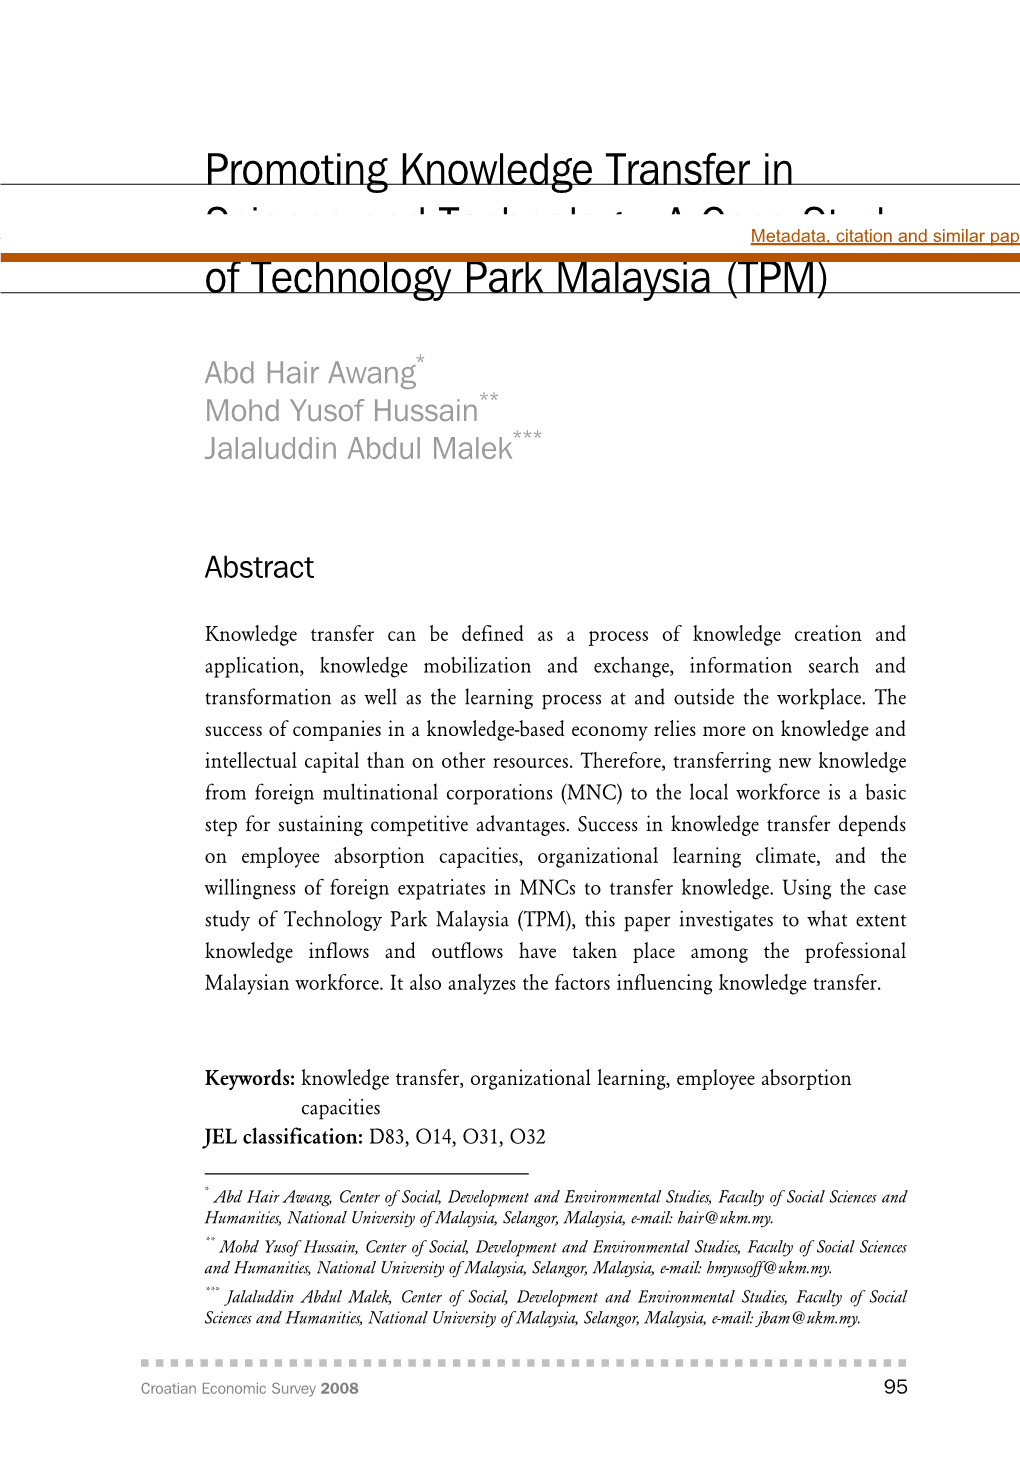 Promoting Knowledge Transfer in Science and Technology: a Case Study of Technology Park Malaysia (TPM)